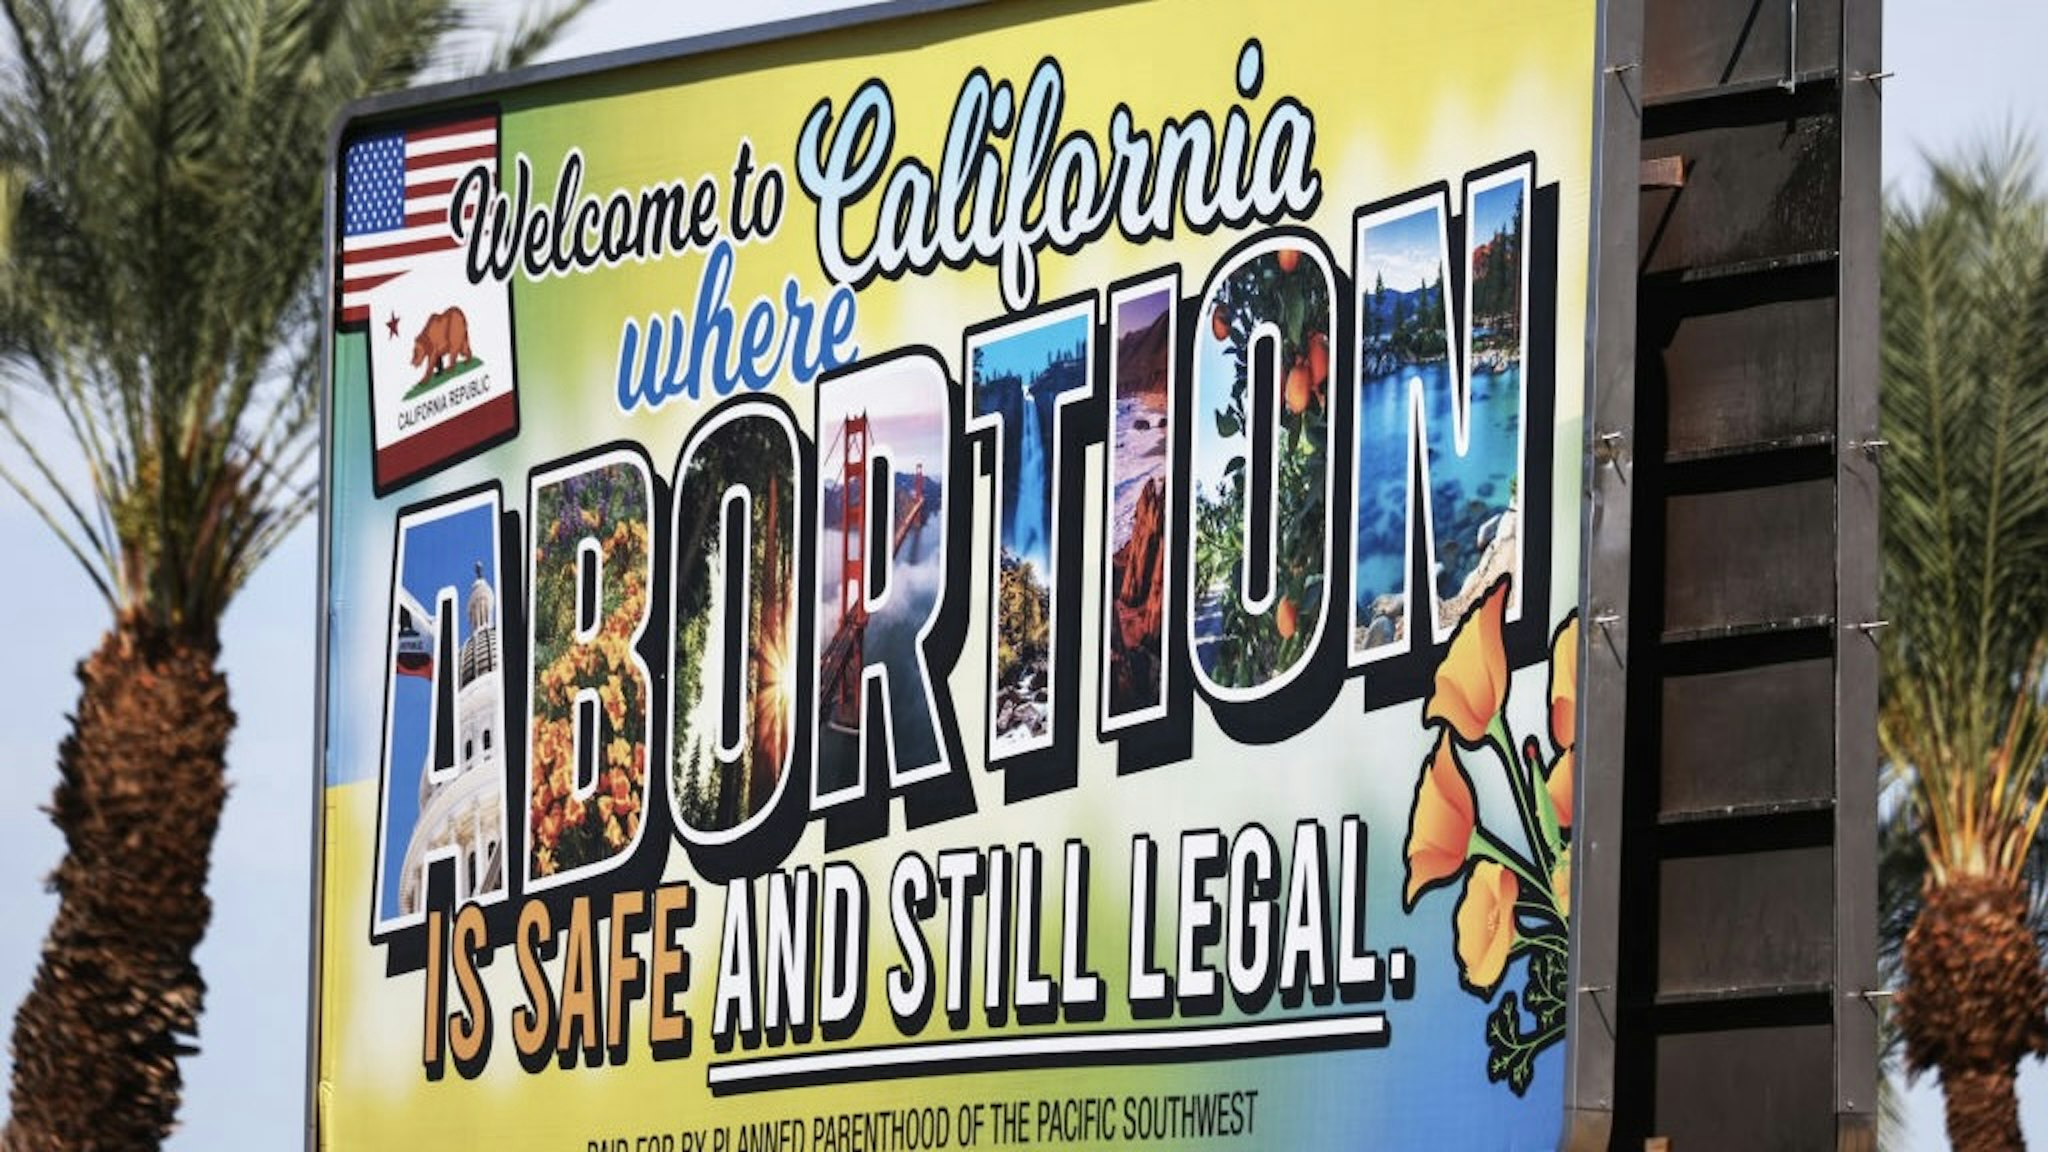 Billboard In California Promotes State's Legal Abortion Access RANCHO MIRAGE, CALIFORNIA - JULY 12: A billboard reads, 'Welcome to California where abortion is safe and still legal' on July 12, 2022 in Rancho Mirage, California. The billboard was paid for by Planned Parenthood of the Pacific Southwest. The number of patients from outside states increased 900 percent at Planned Parenthood clinics in San Bernardino and Orange counties the week following the Supreme Court's decision in the Dobbs v Jackson Women's Health case. The decision overturned the landmark 50-year-old Roe v Wade case and erased a federal right to an abortion. (Photo by Mario Tama/Getty Images) Mario Tama / Staff